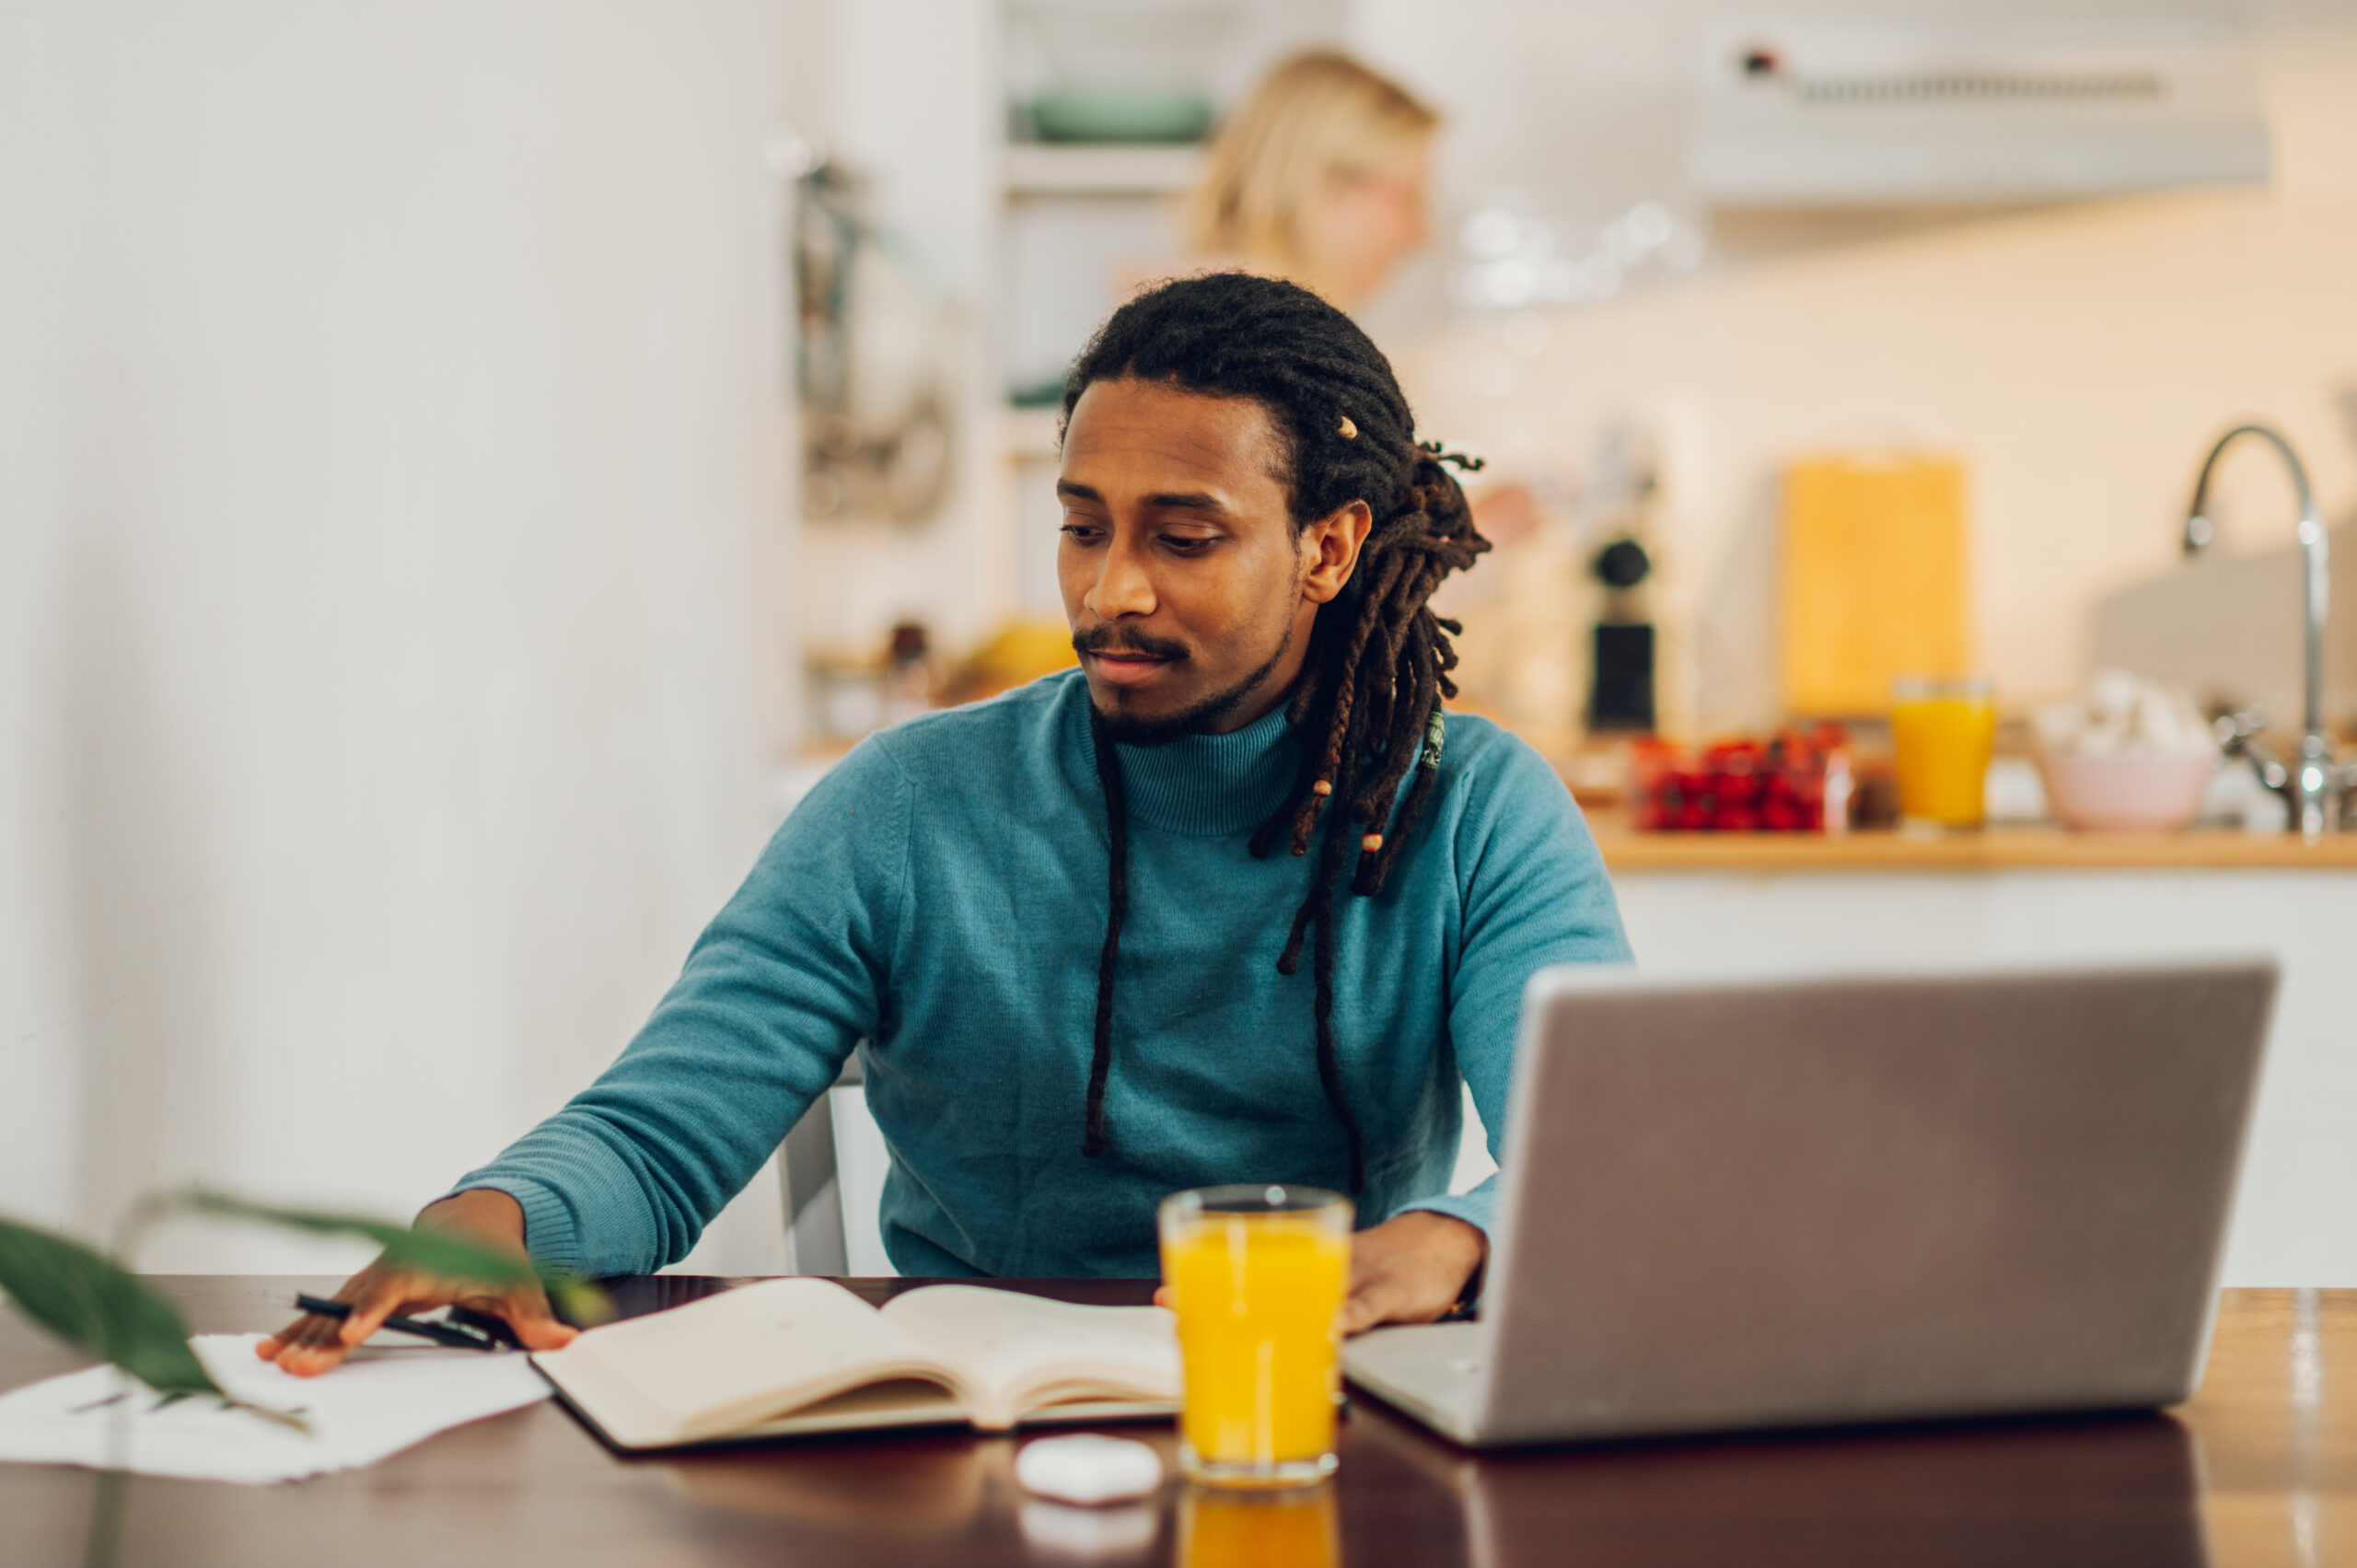 An Arabic data scientist is sitting at home and working on paperwork and data entry. A multicultural remote worker is working with paperwork and documents while using a laptop from home.